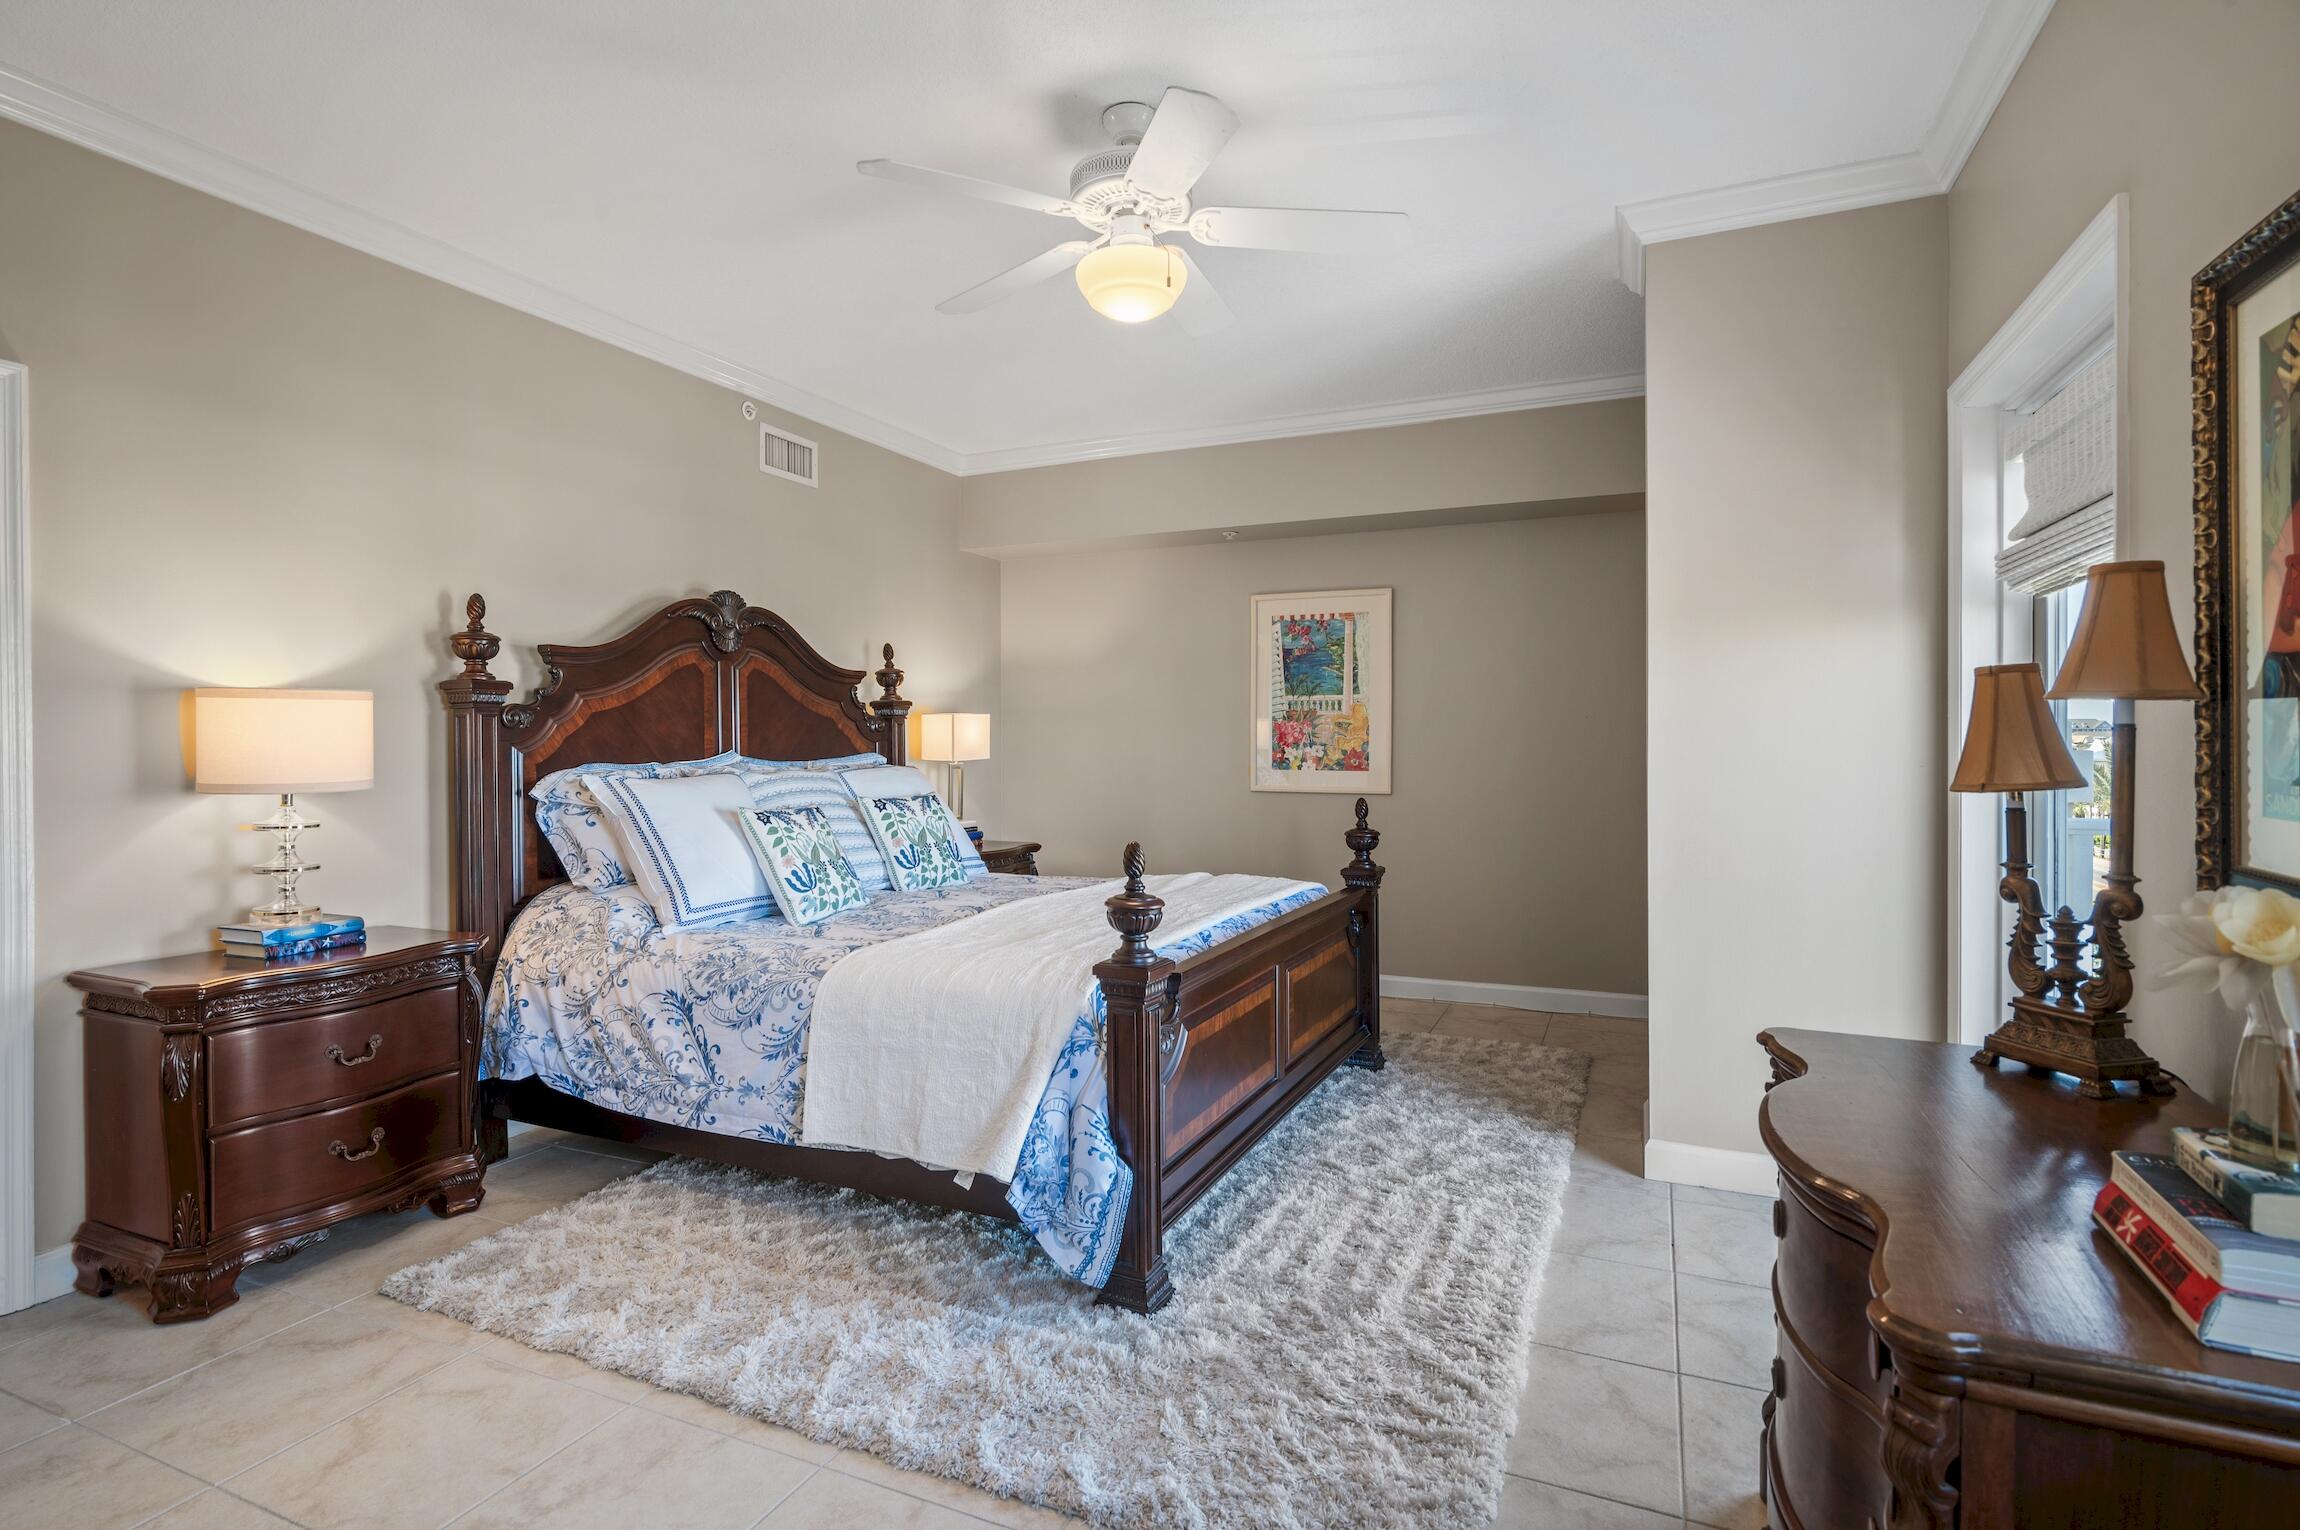 2996 Scenic Hwy 98 UNIT 501, Destin, Florida, 32541, United States, 6 Bedrooms Bedrooms, ,4 BathroomsBathrooms,Residential,For Sale,2996 Scenic Hwy 98 UNIT 501,1492290